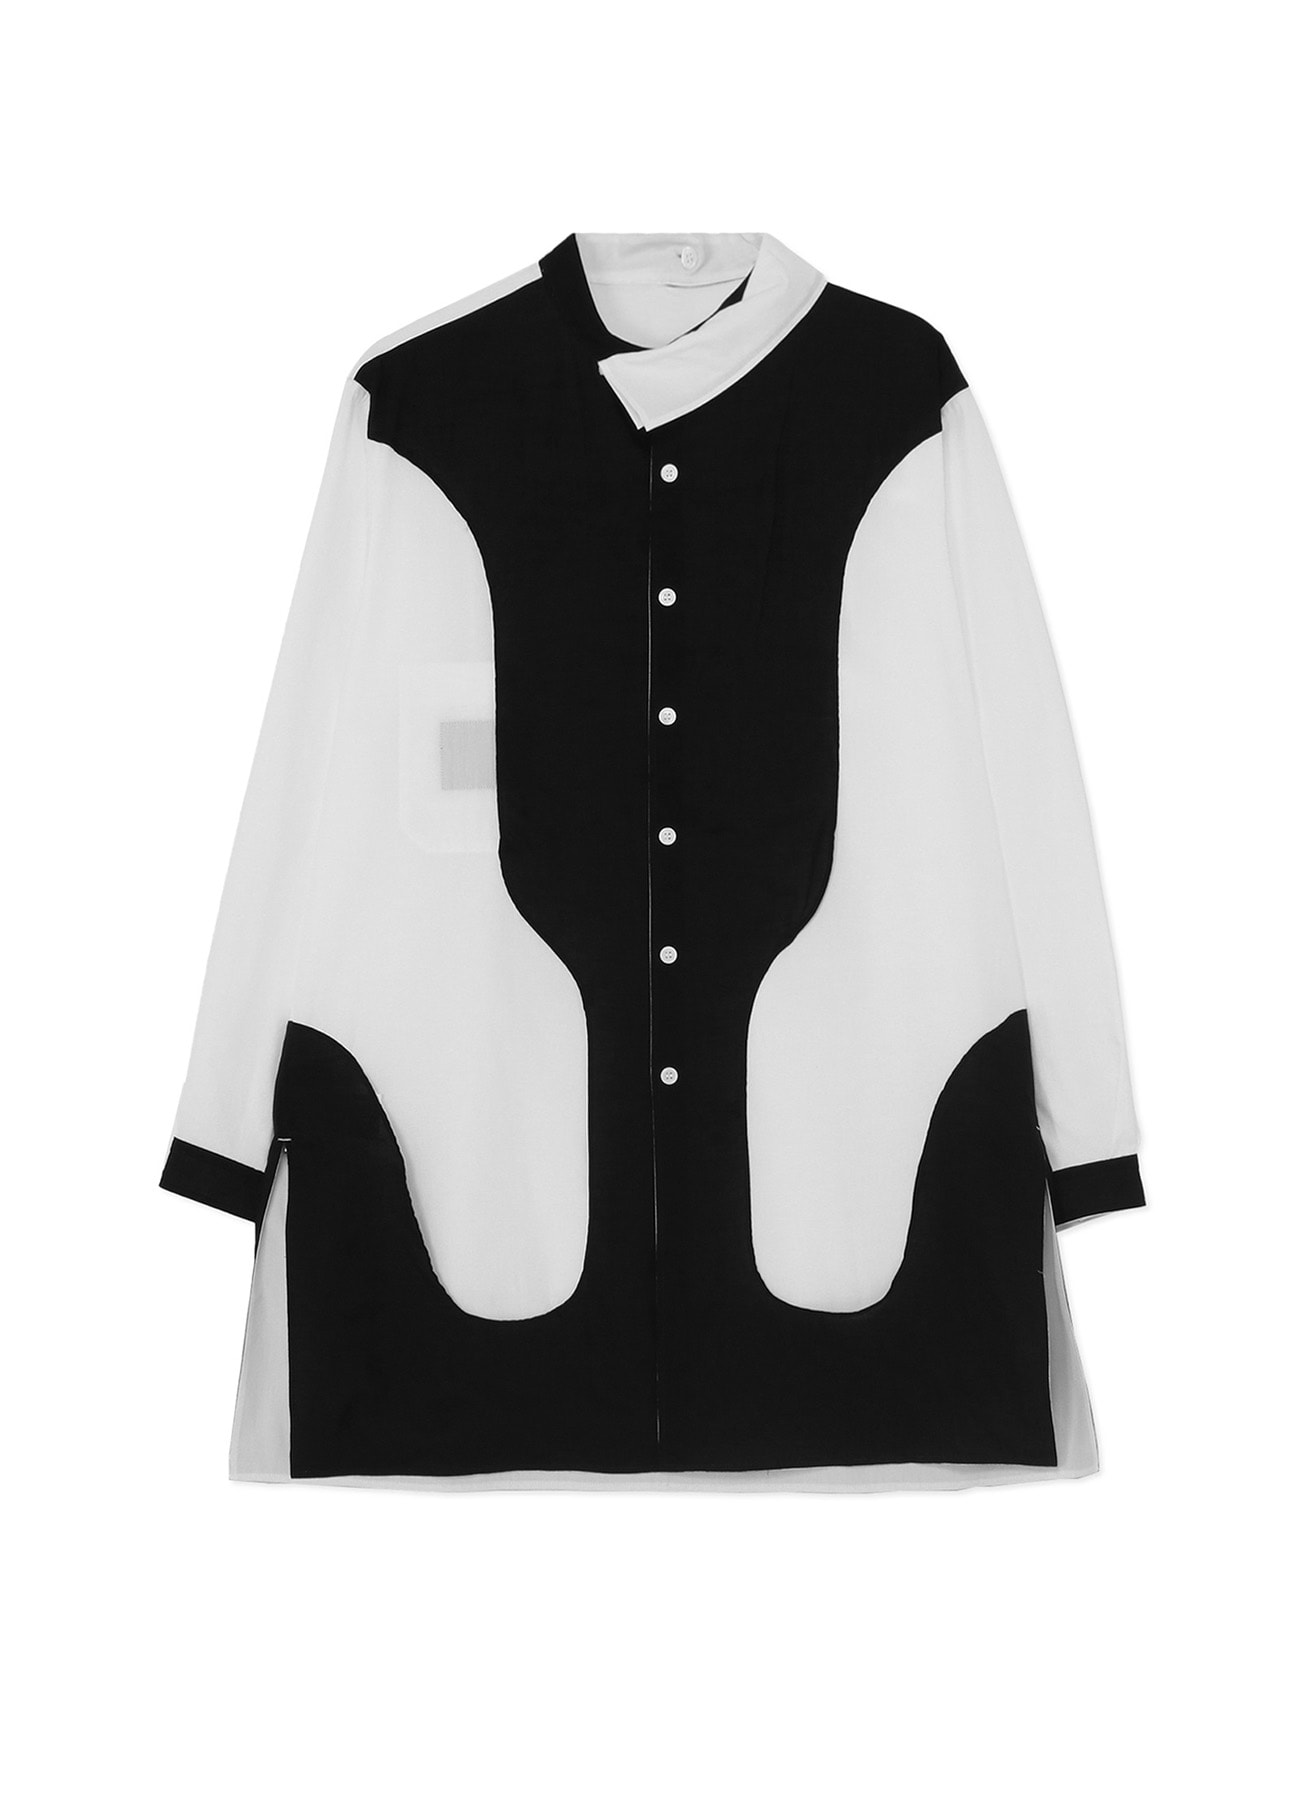 BLACK AND WHITE SHIRT WITH HALF DOUBLE COLLAR